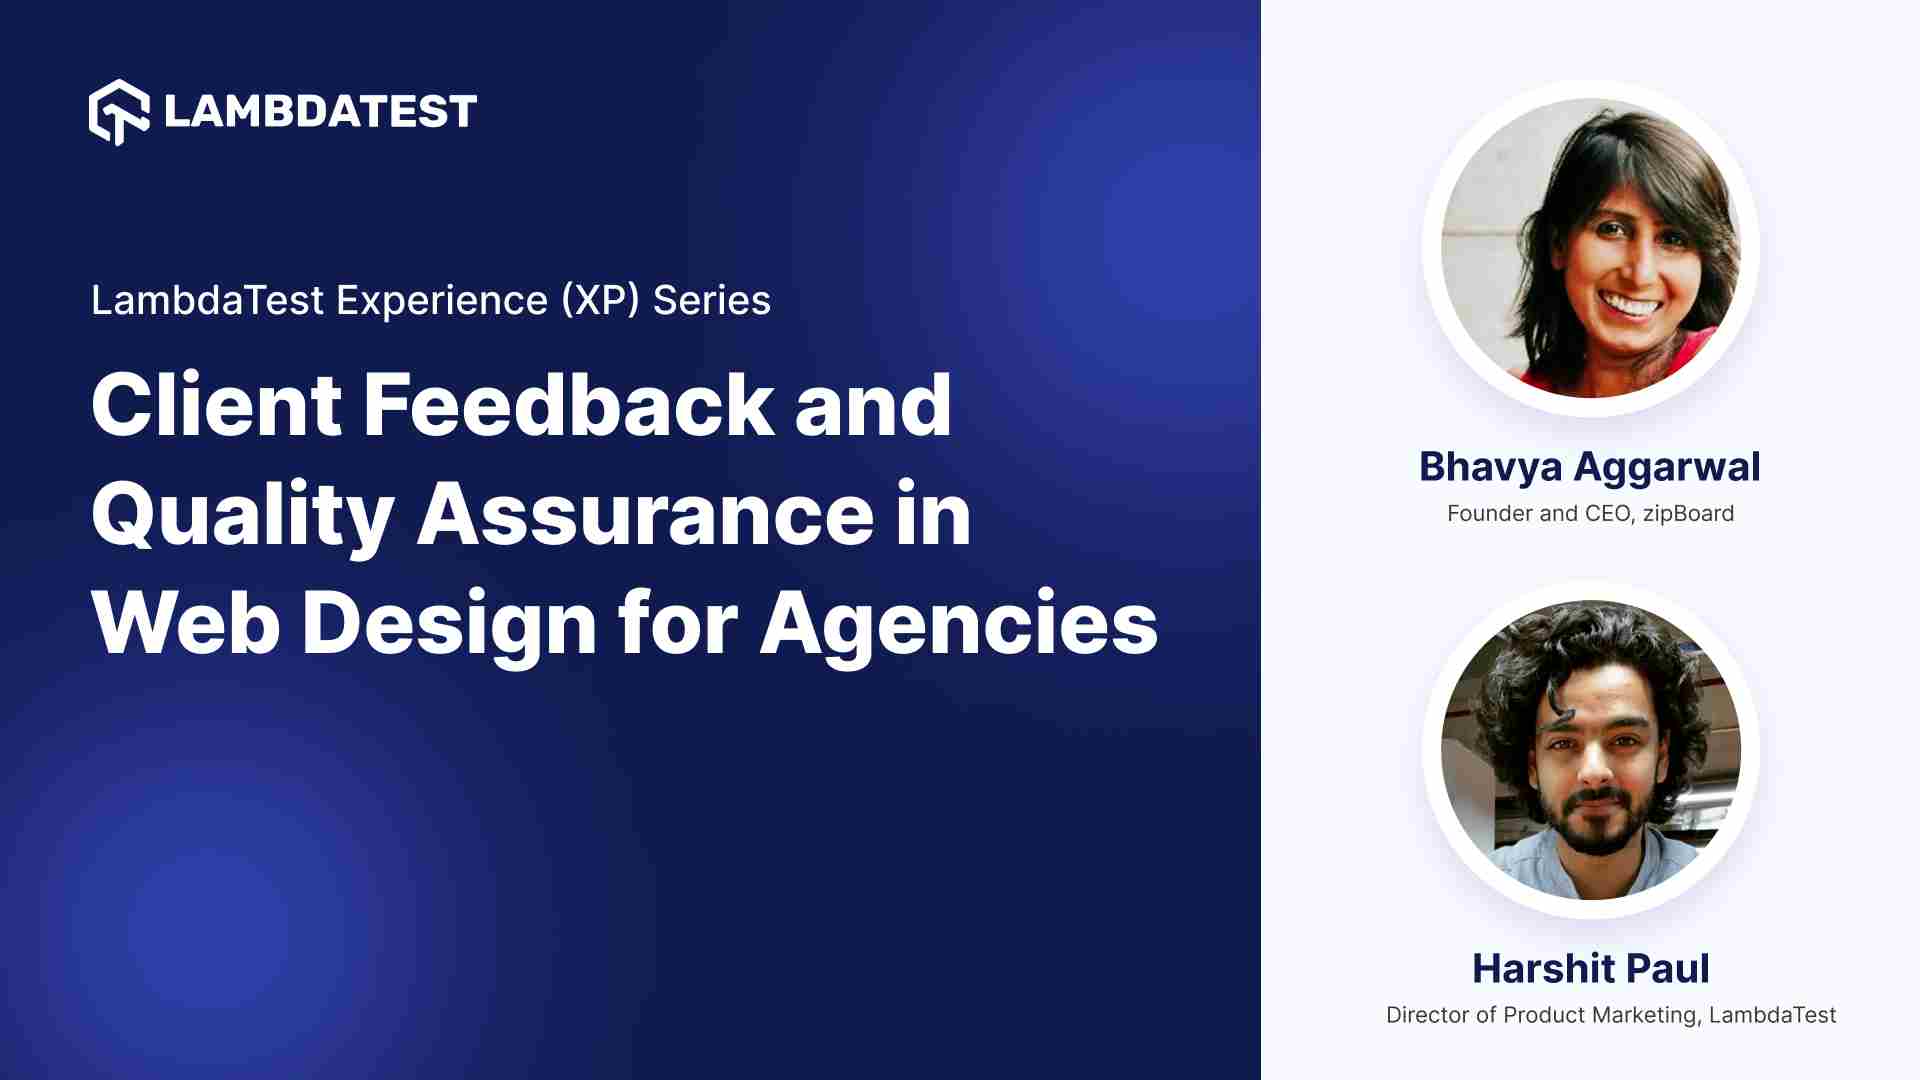 client-feedback-and-quality-assurance-in-web-design-for-agencies